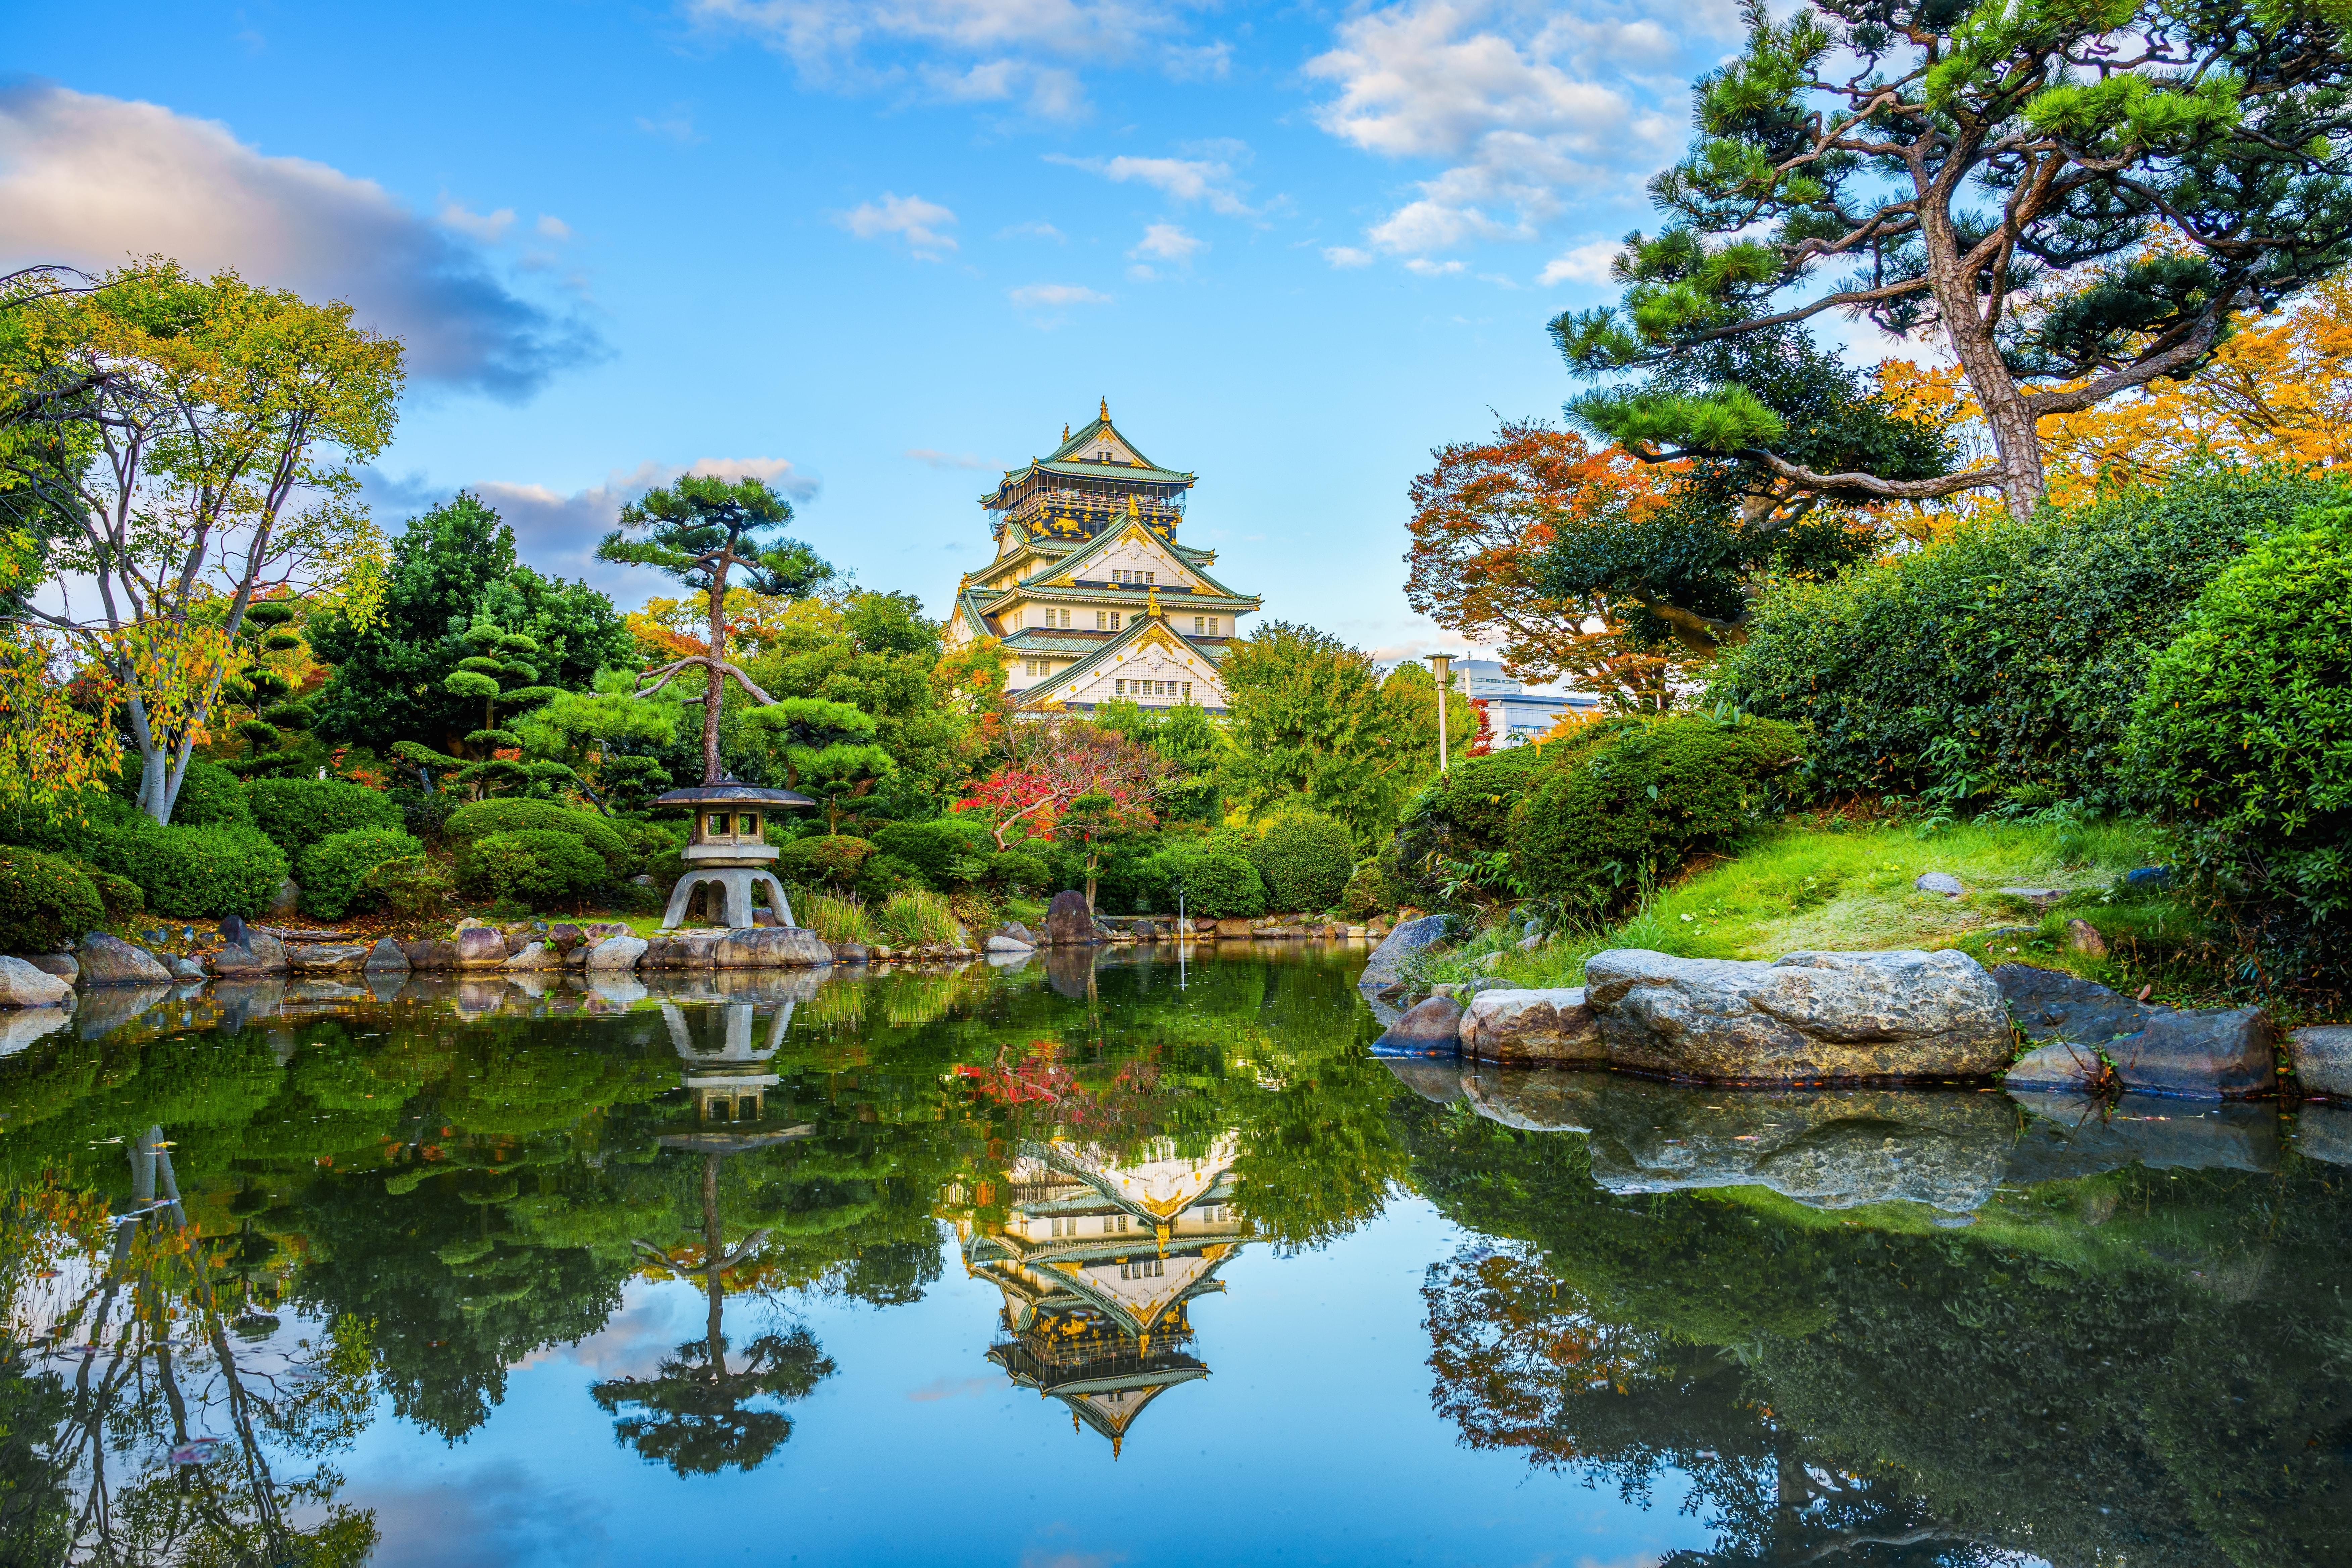 Osaka Packages from Rajkot | Get Upto 50% Off